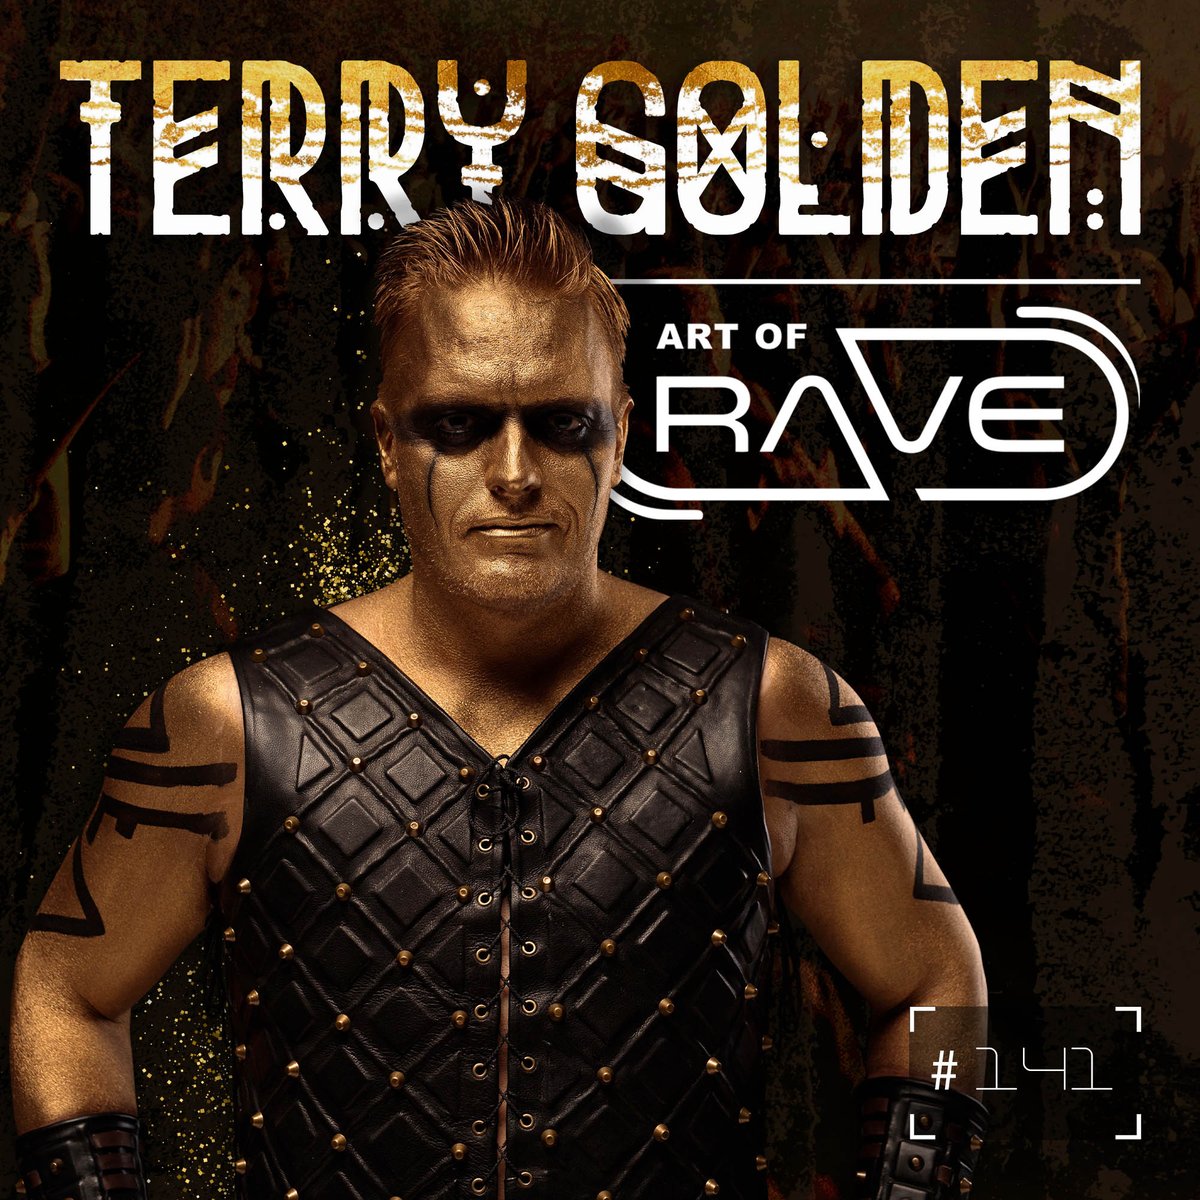 #onair now at #Radio jenny.fm Terry Golden - The Art of #Rave #Radioshow